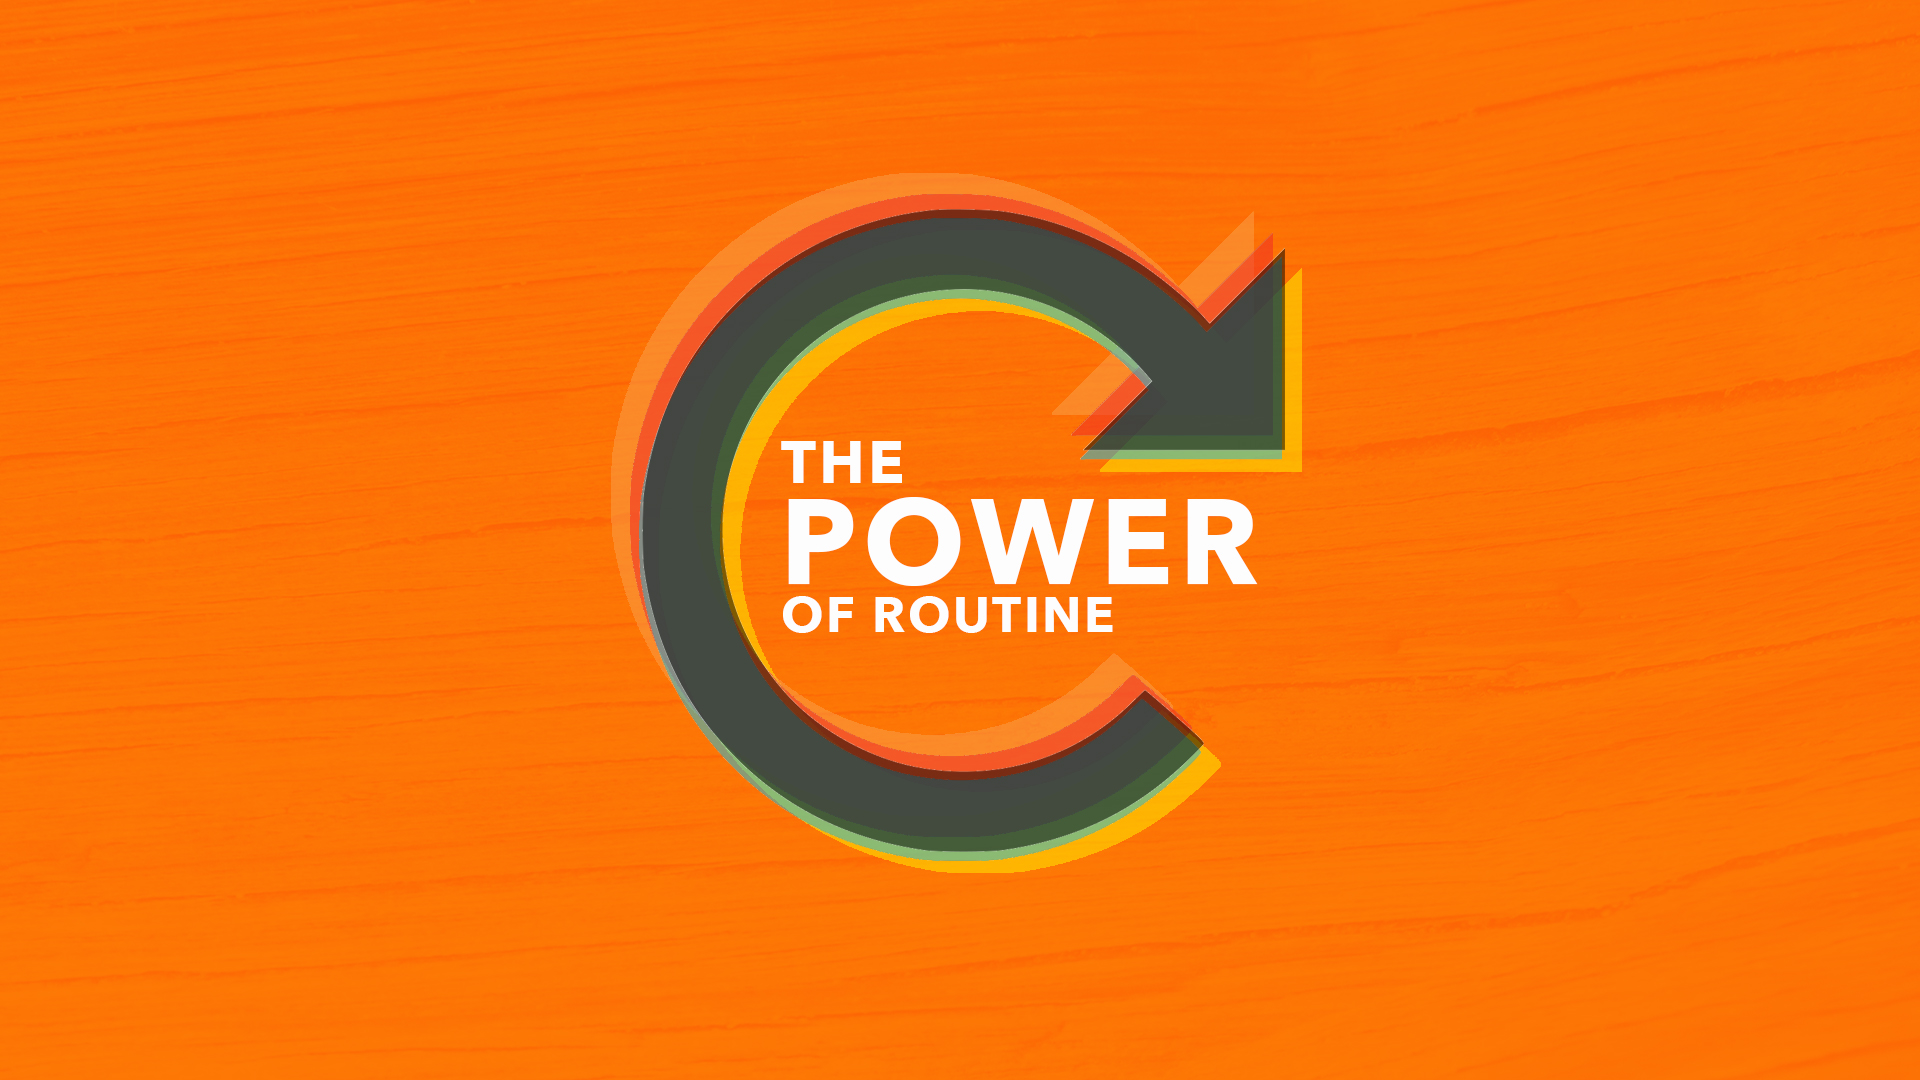 The Power of Routine: Bible Reading